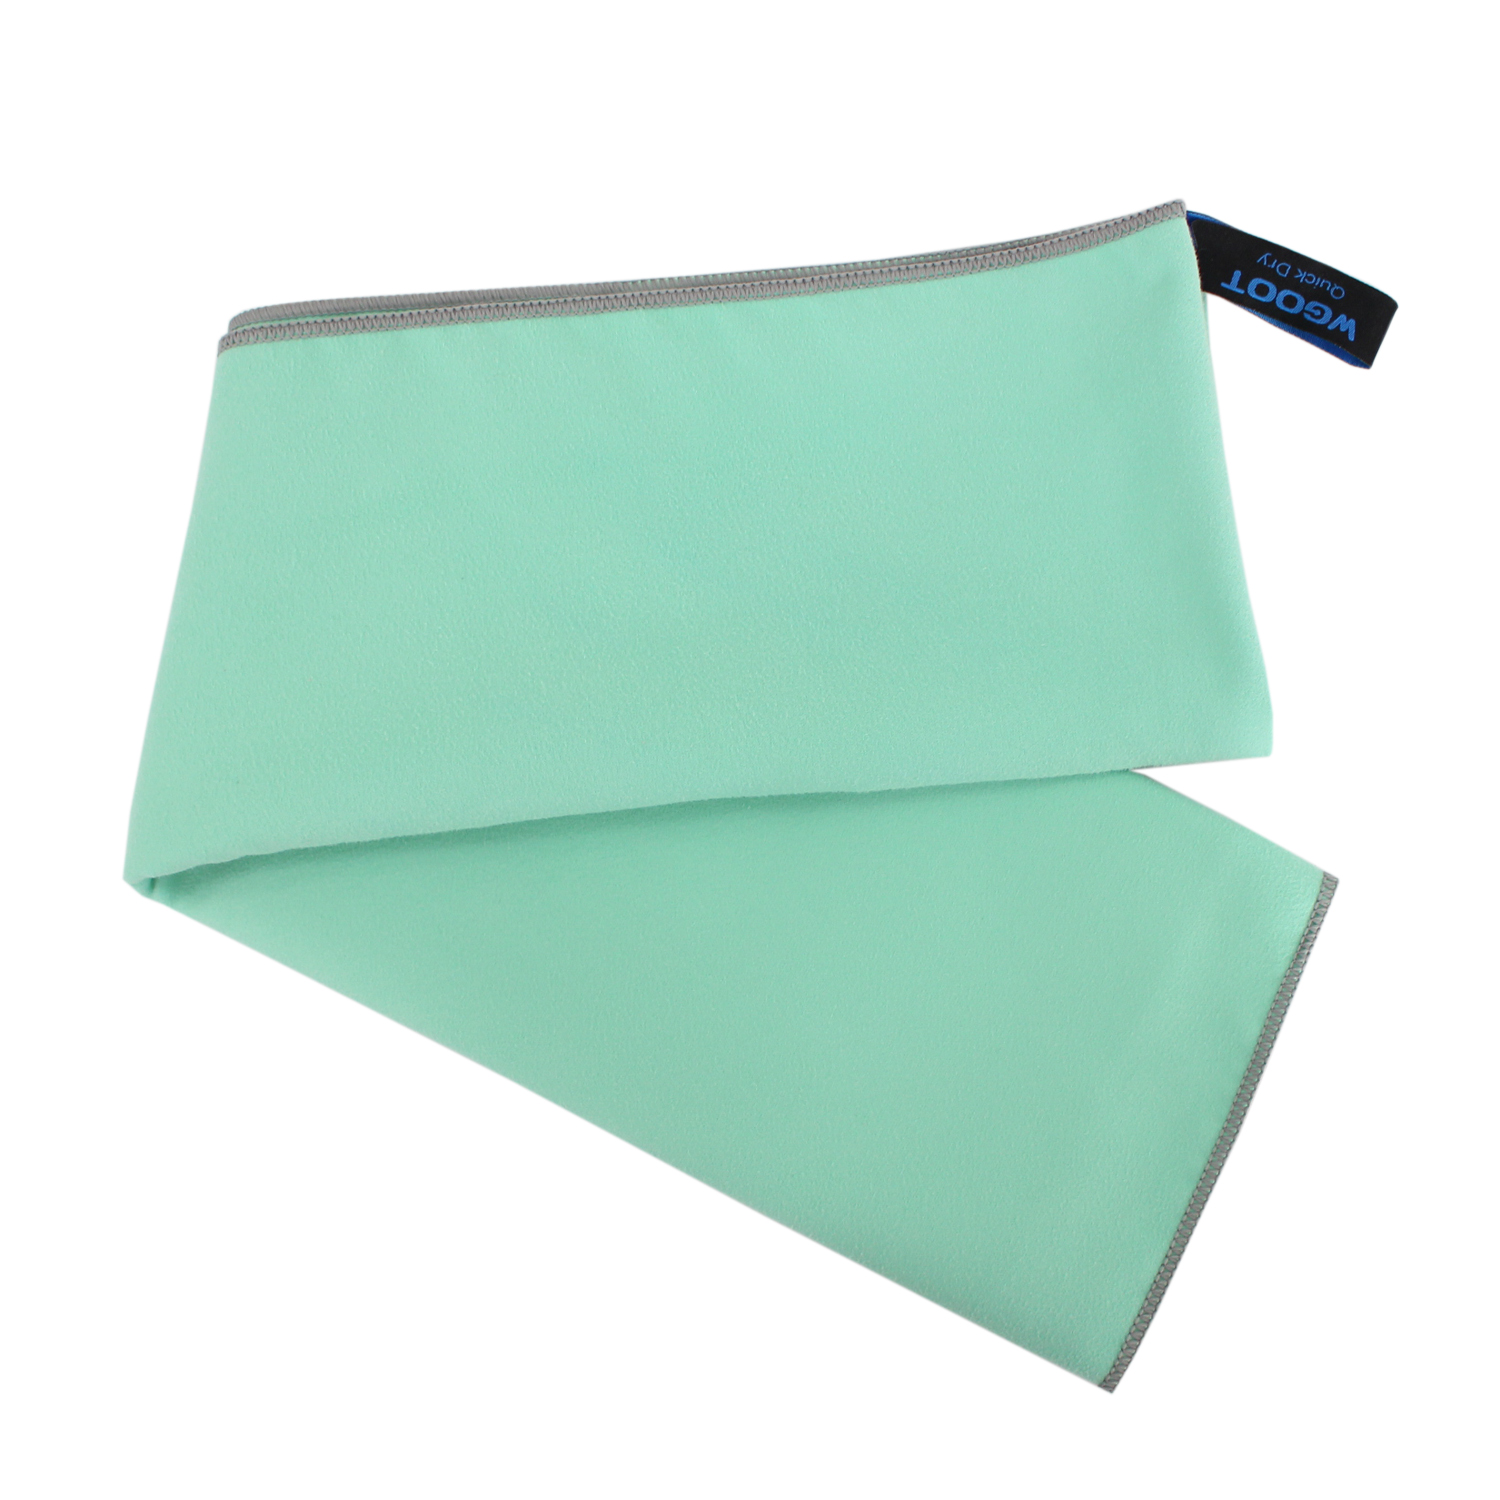 Quick dry microfiber towel for outdoor